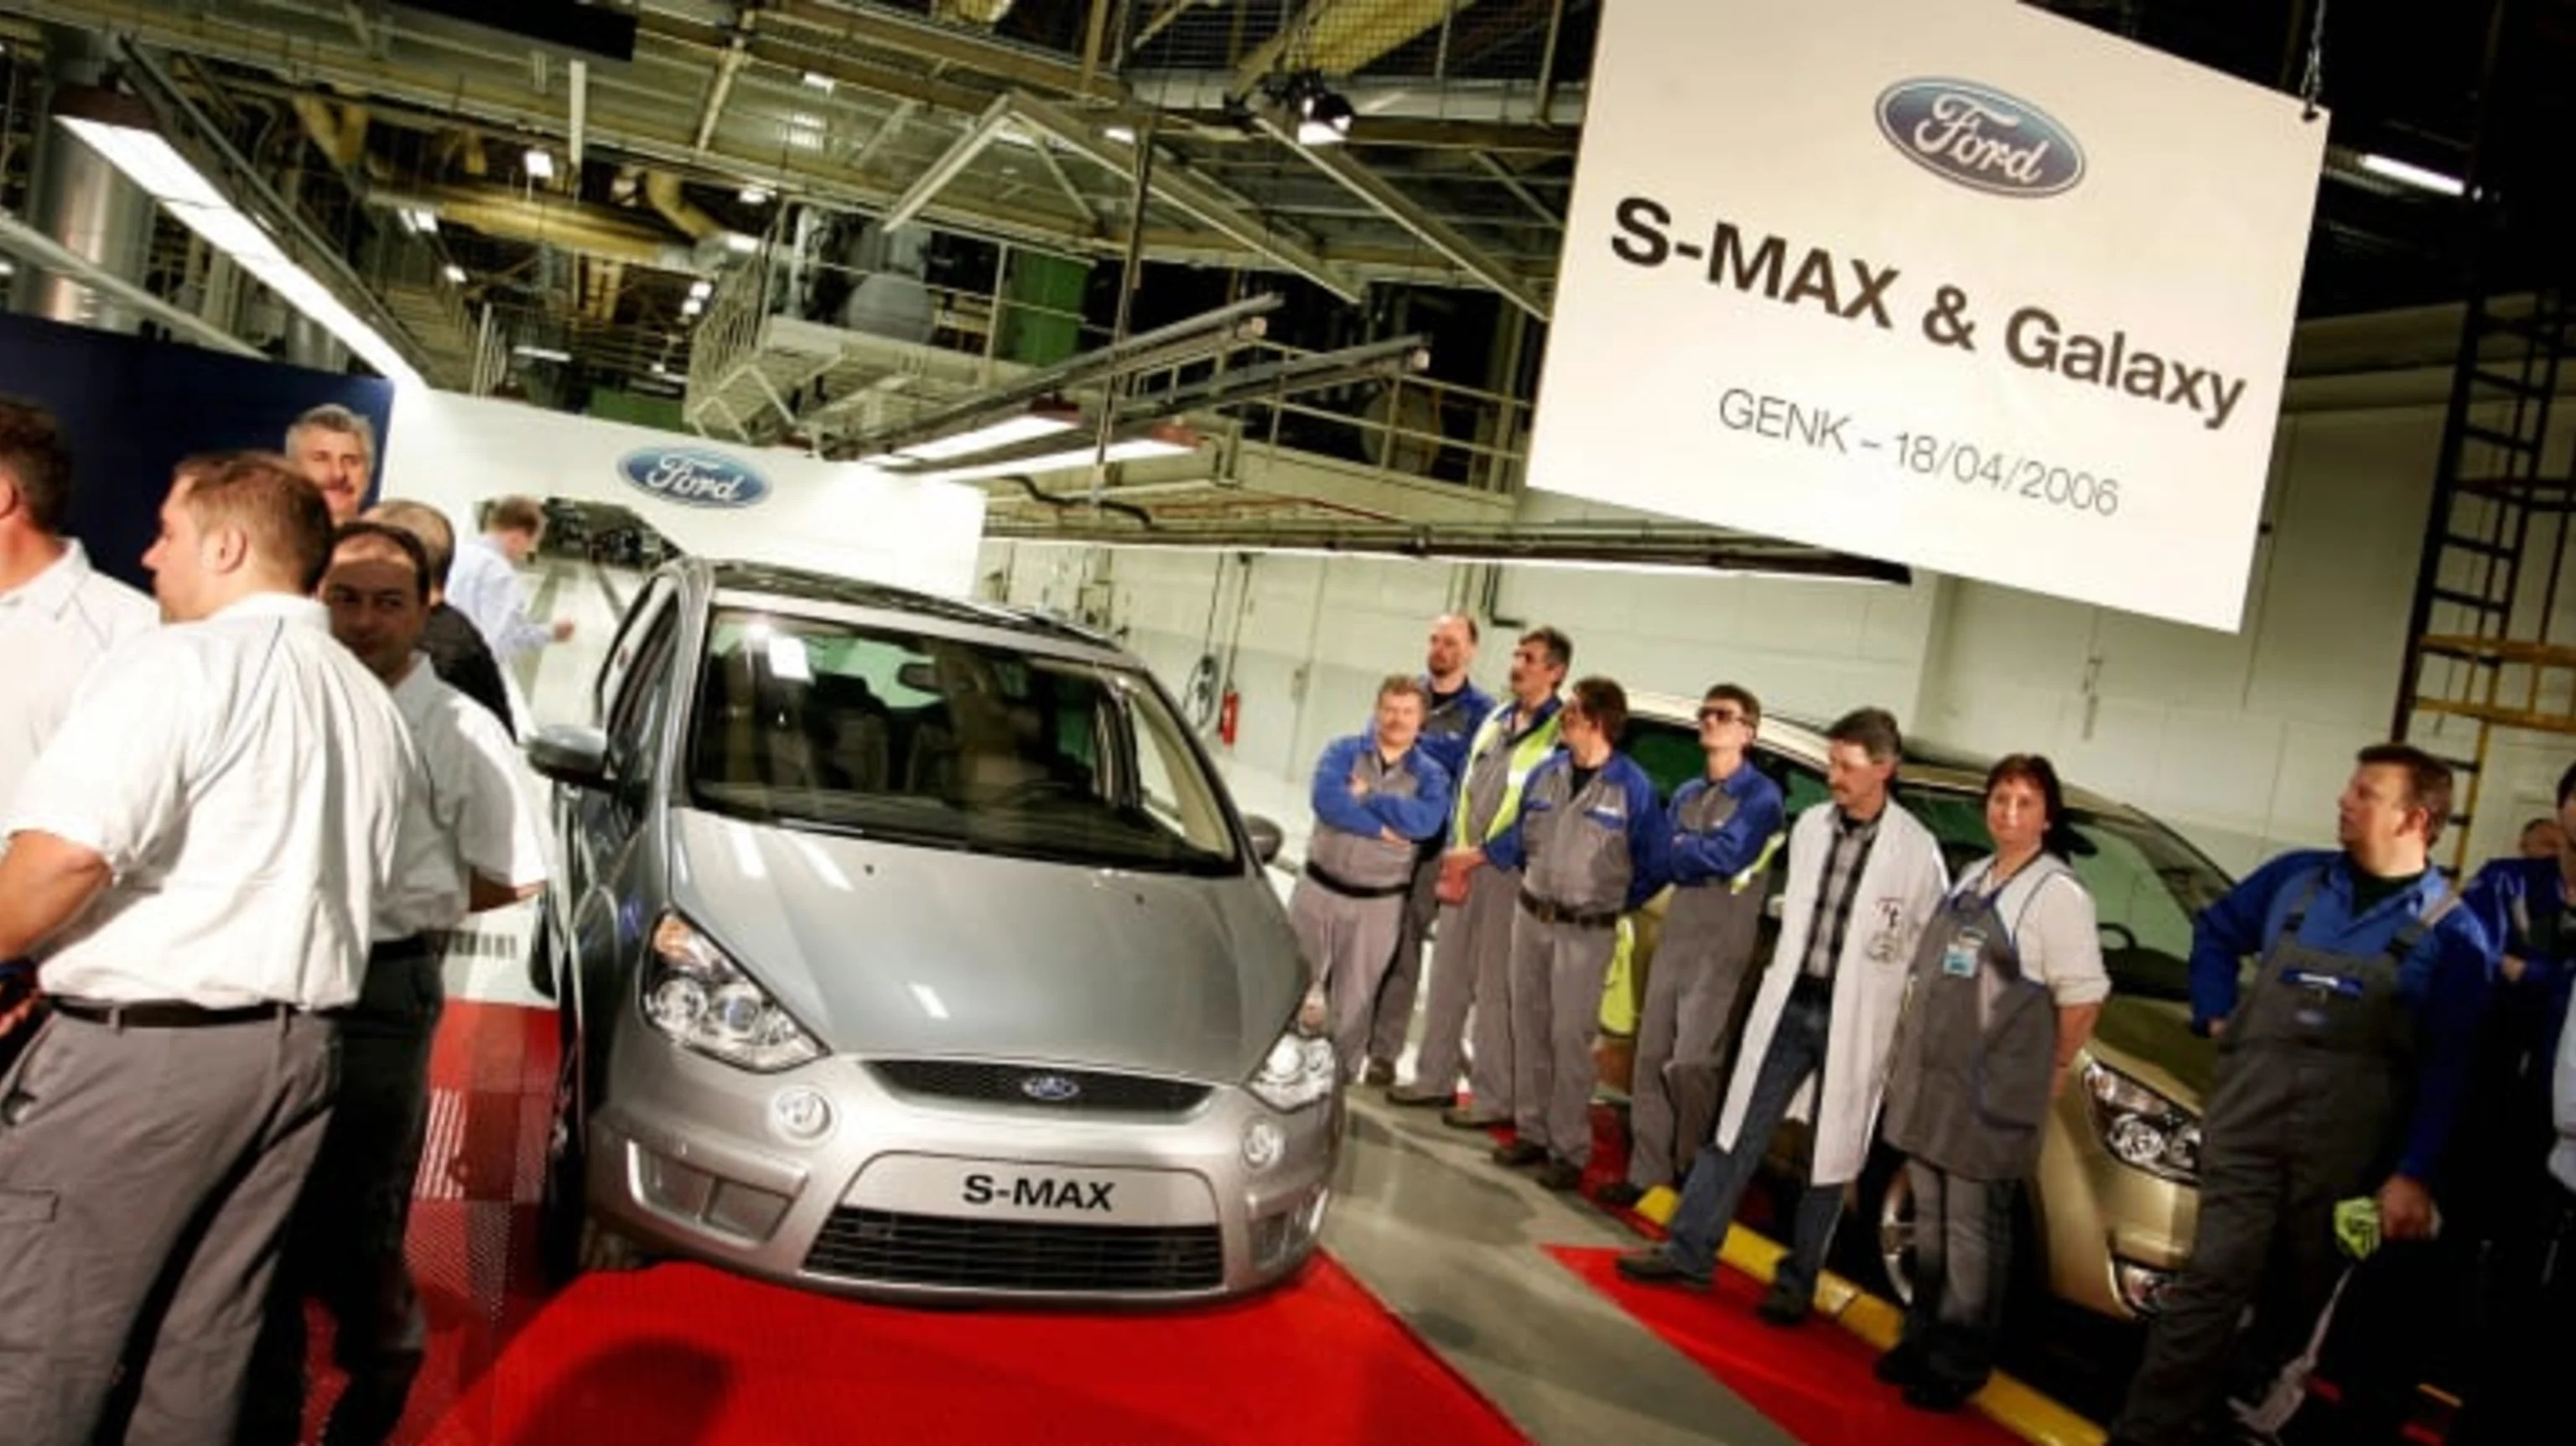 A new Ford S-Max car is displayed at a